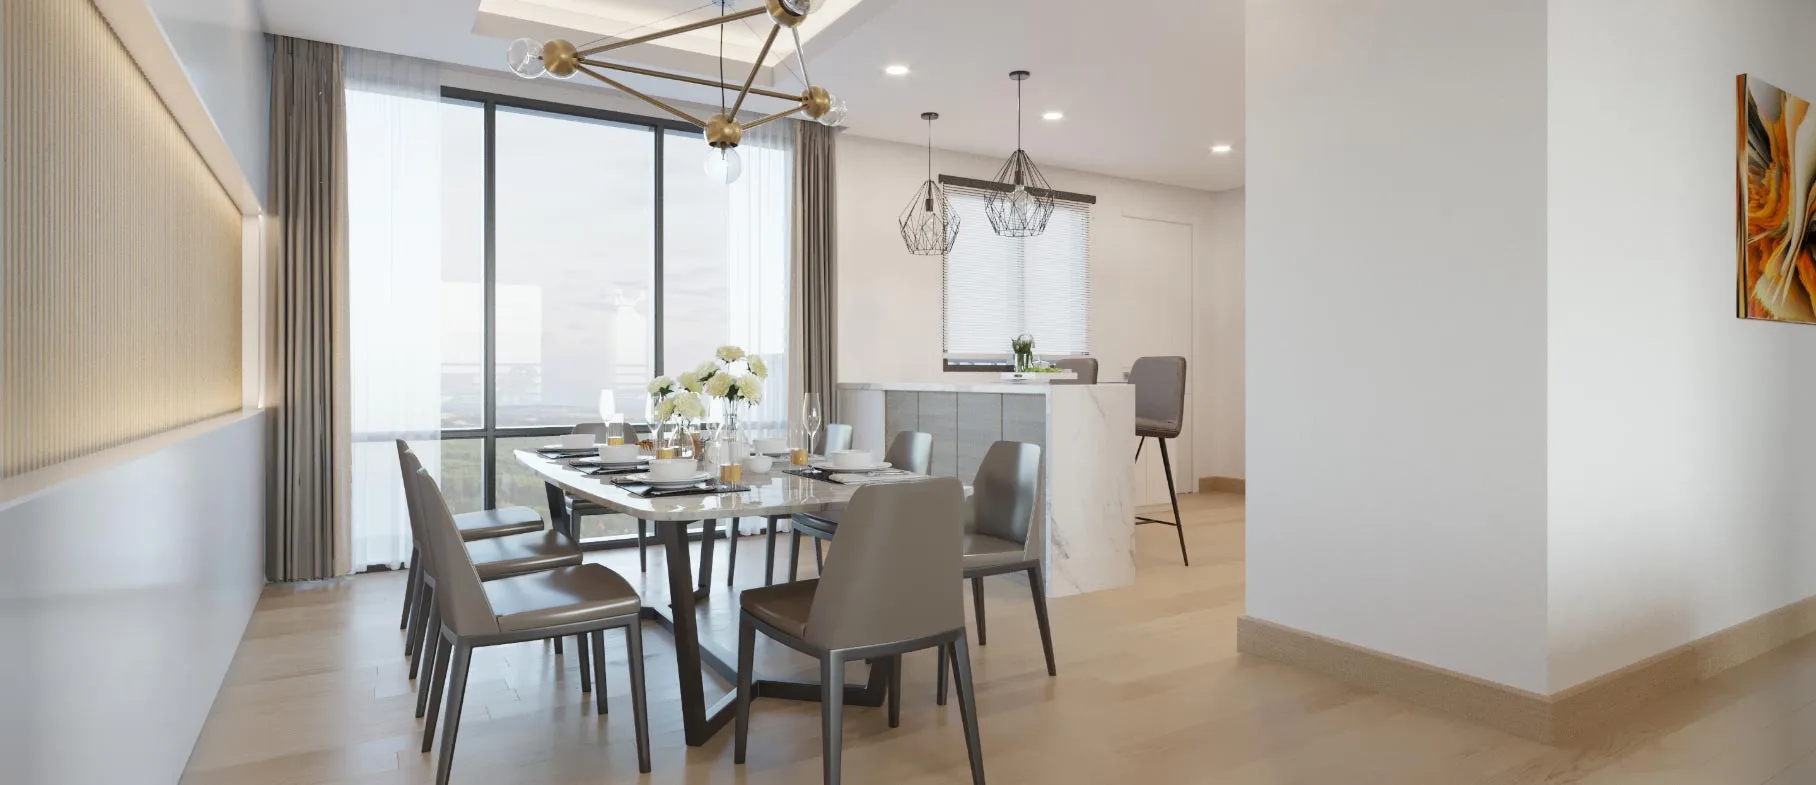 Stylish dining room with expansive window at Nyati-Elite, offering premium flats and ample dining space.